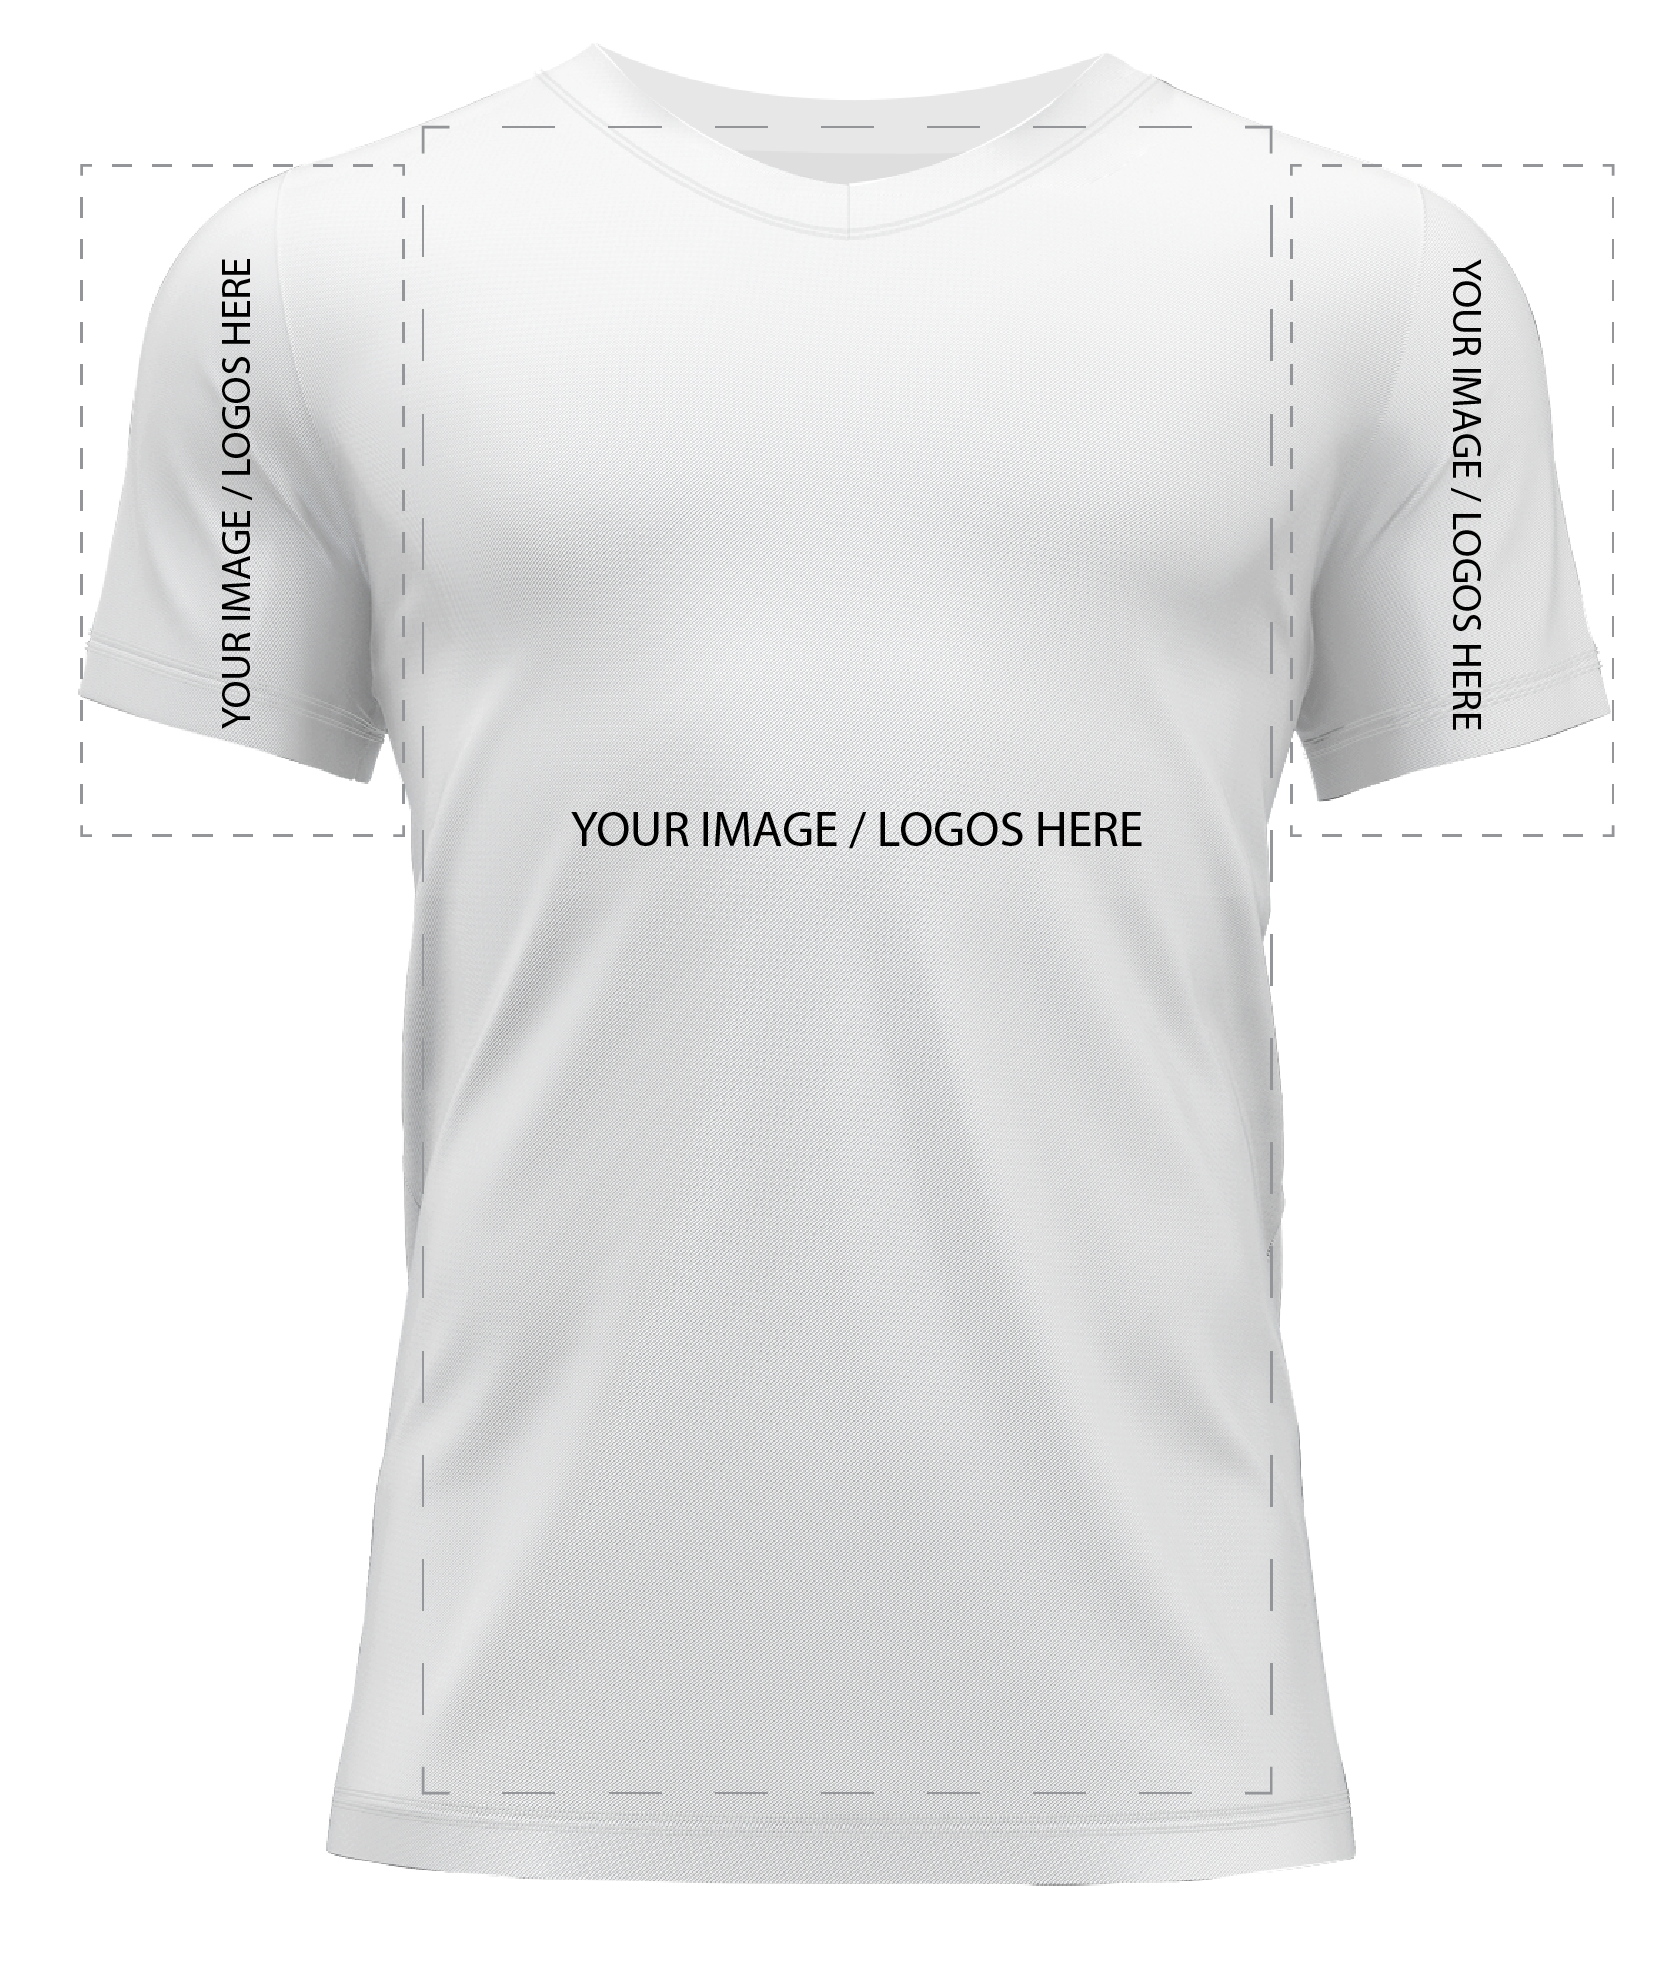 Customized Sportswear For You And Your Team